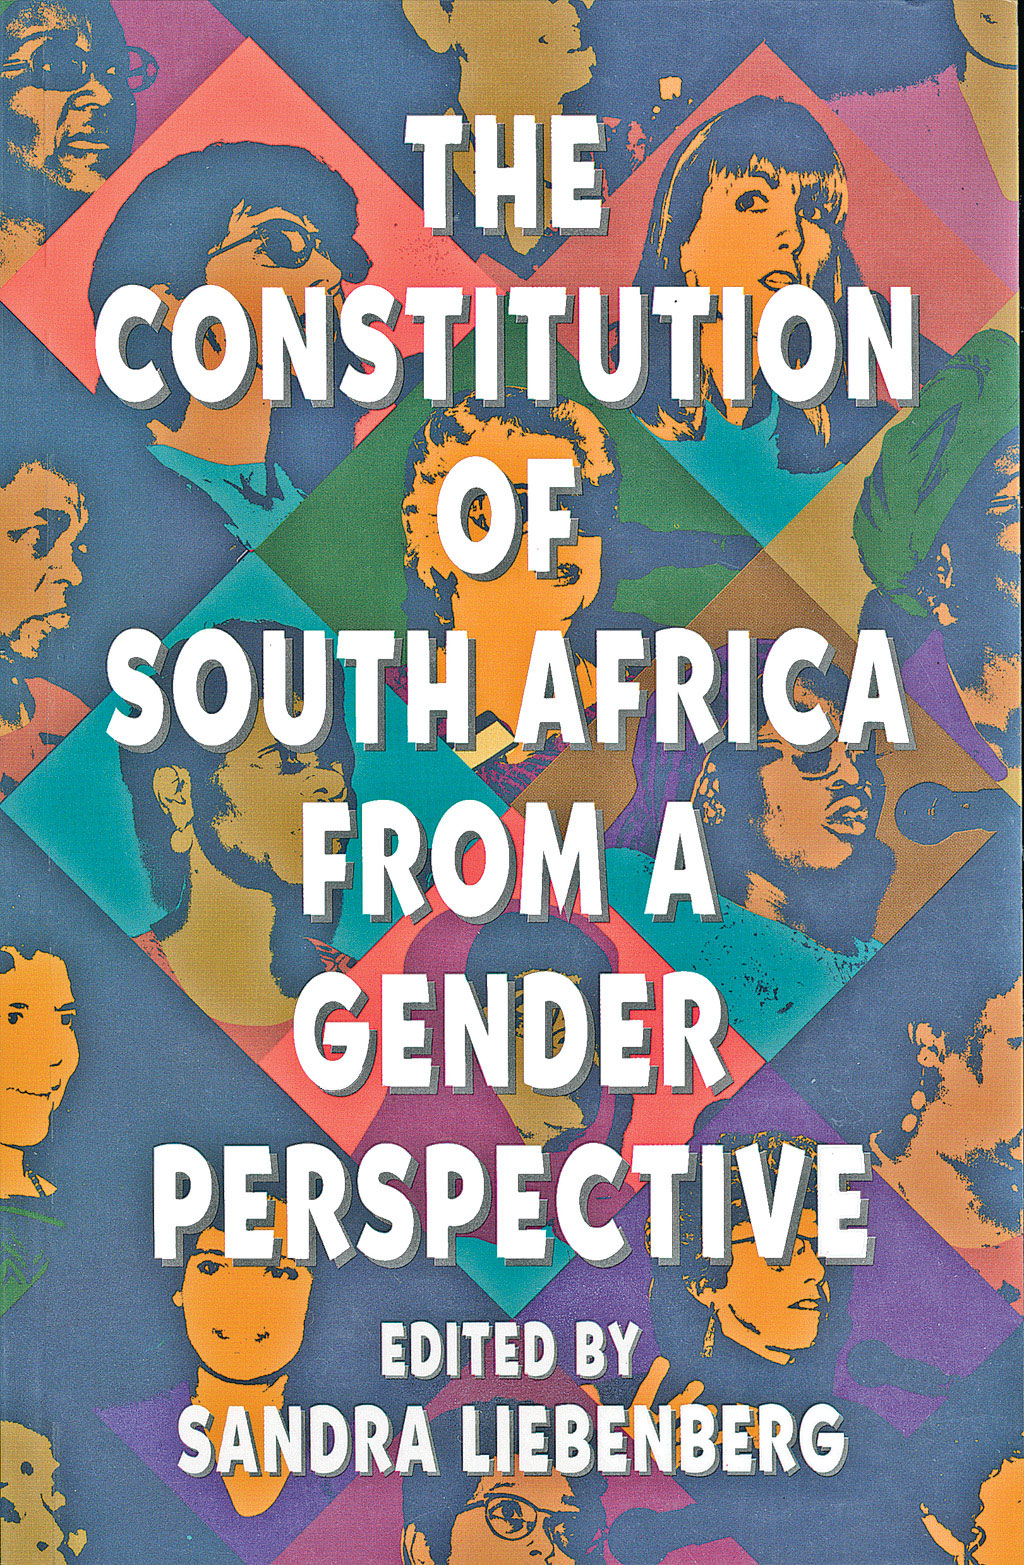 THE CONSTITUTION OF SOUTH AFRICA FROM A GENDER PERSPECTIVE